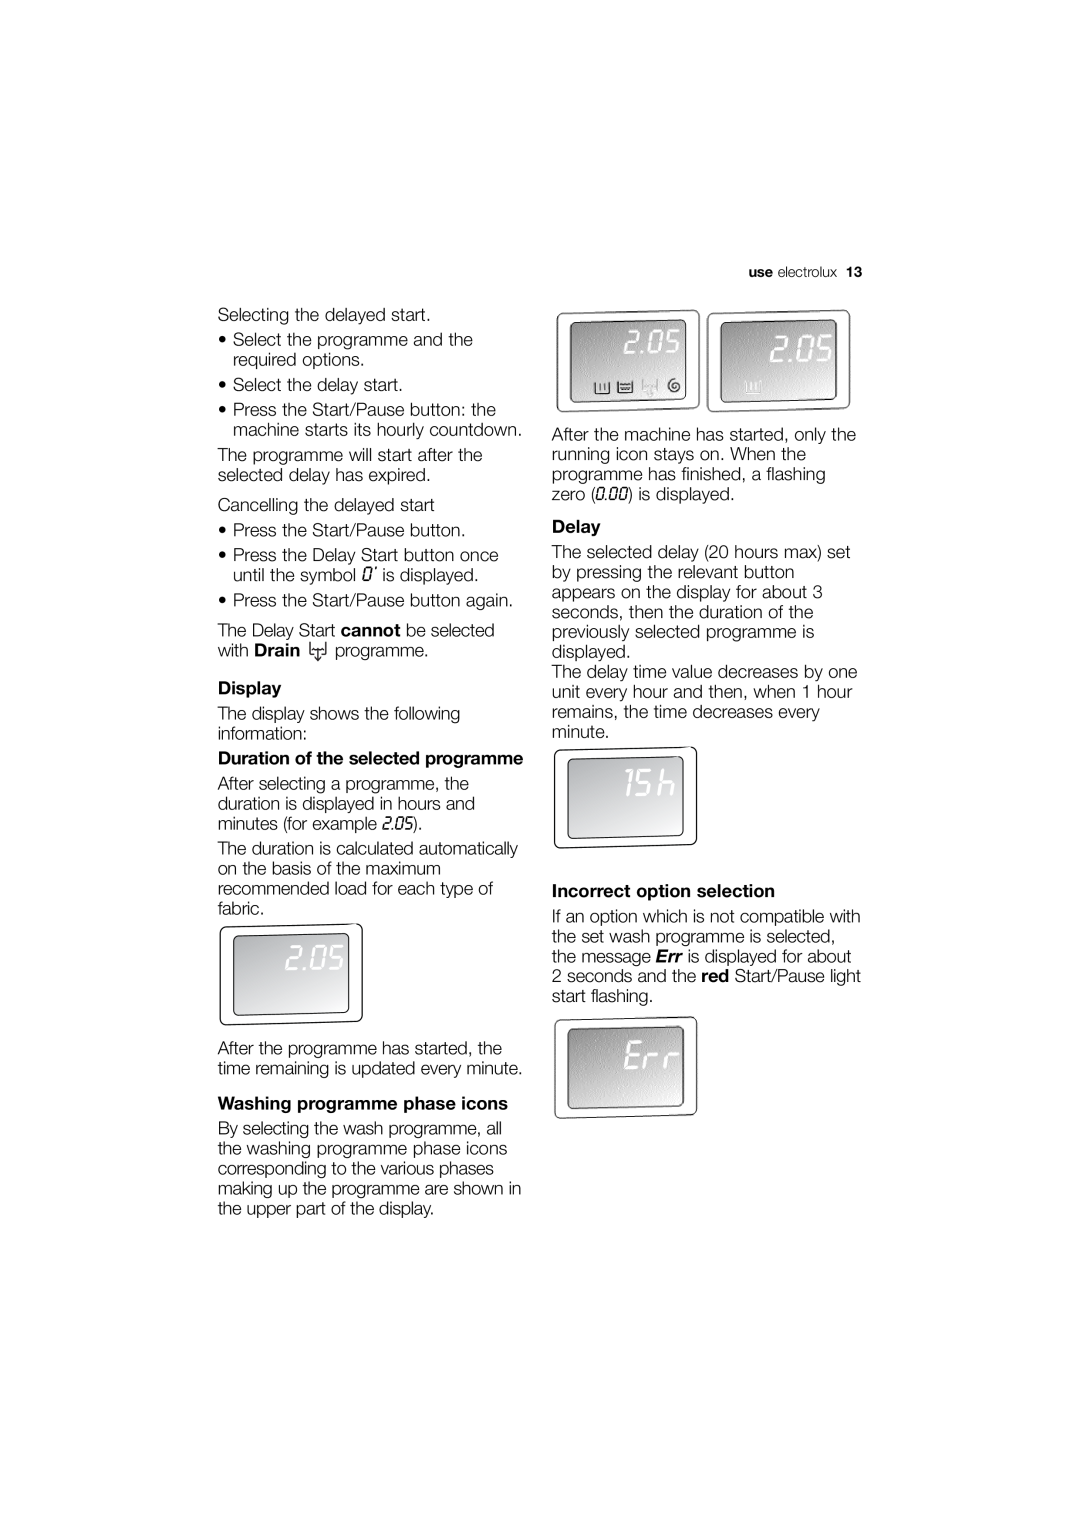 Electrolux EWN 13570 W user manual Display, Duration of the selected programme, Washing programme phase icons, Delay, 2.05 